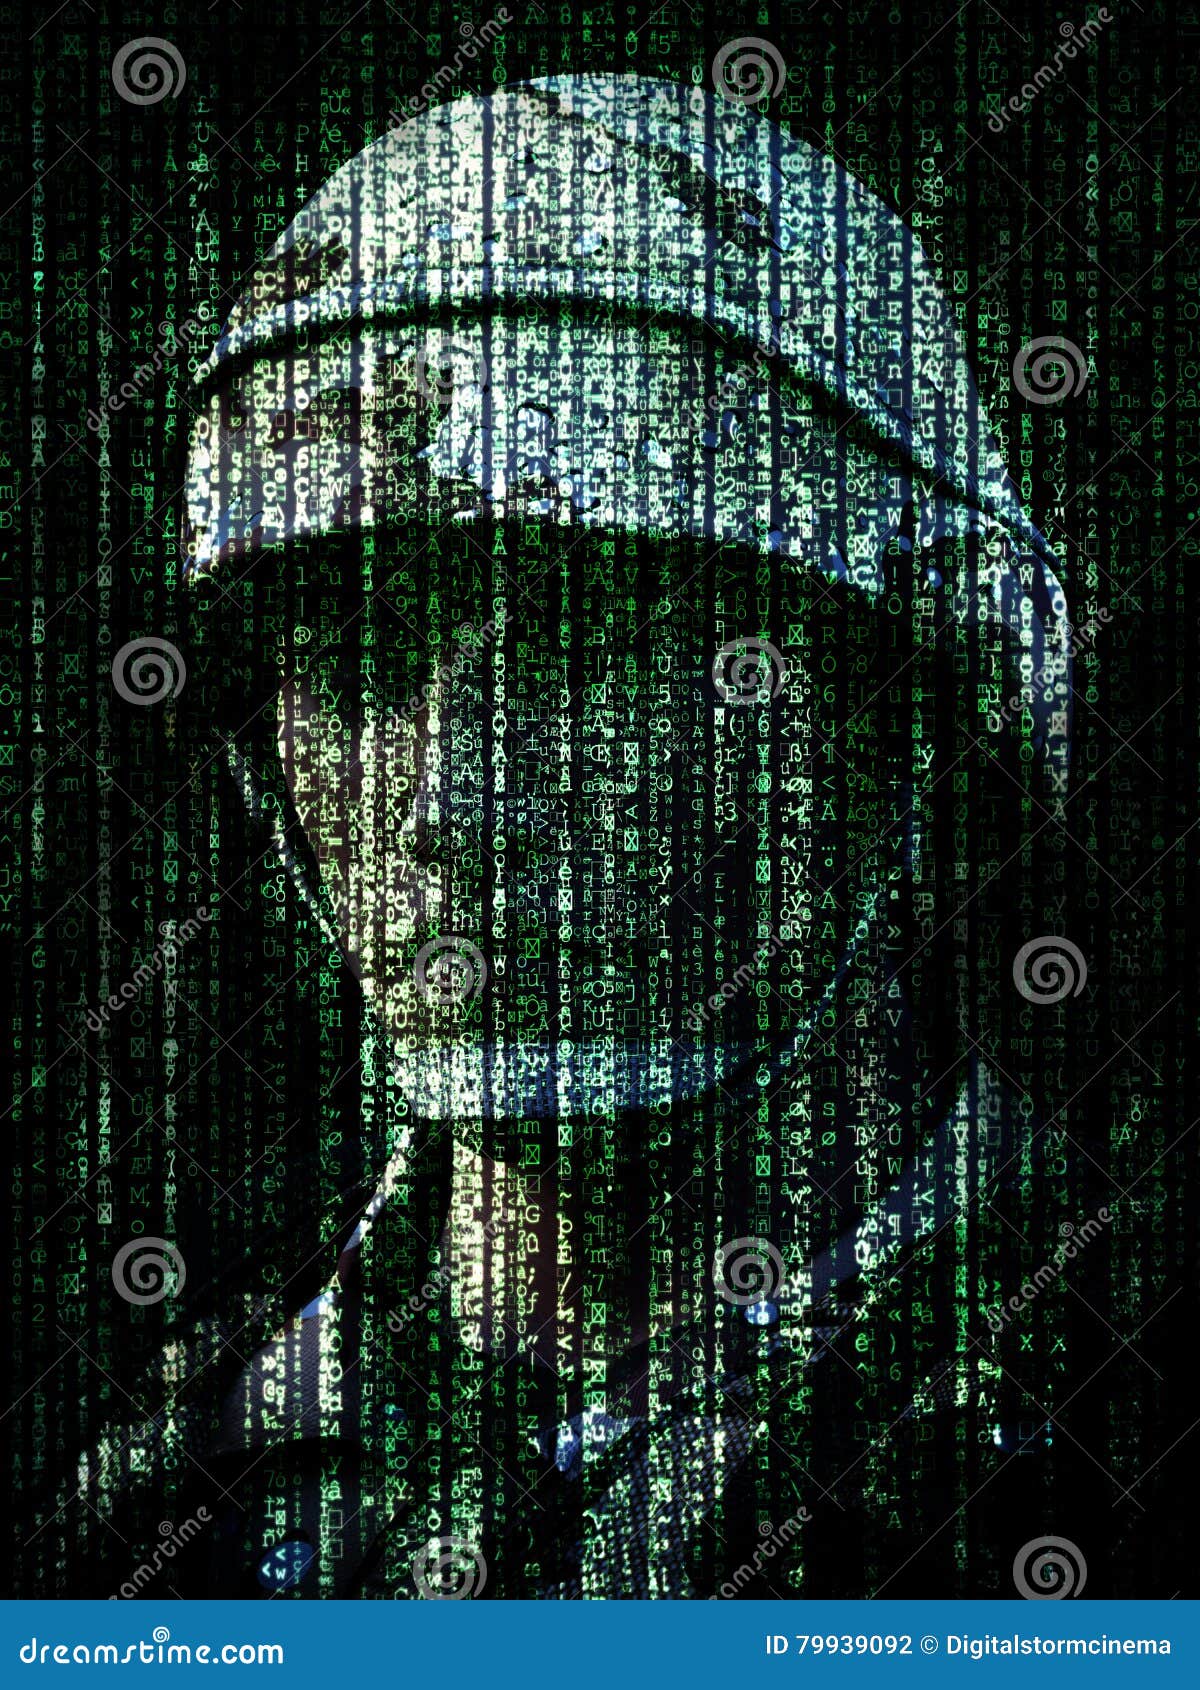 cyber warfare concept. military soldier embedded into computer internet  binary code.